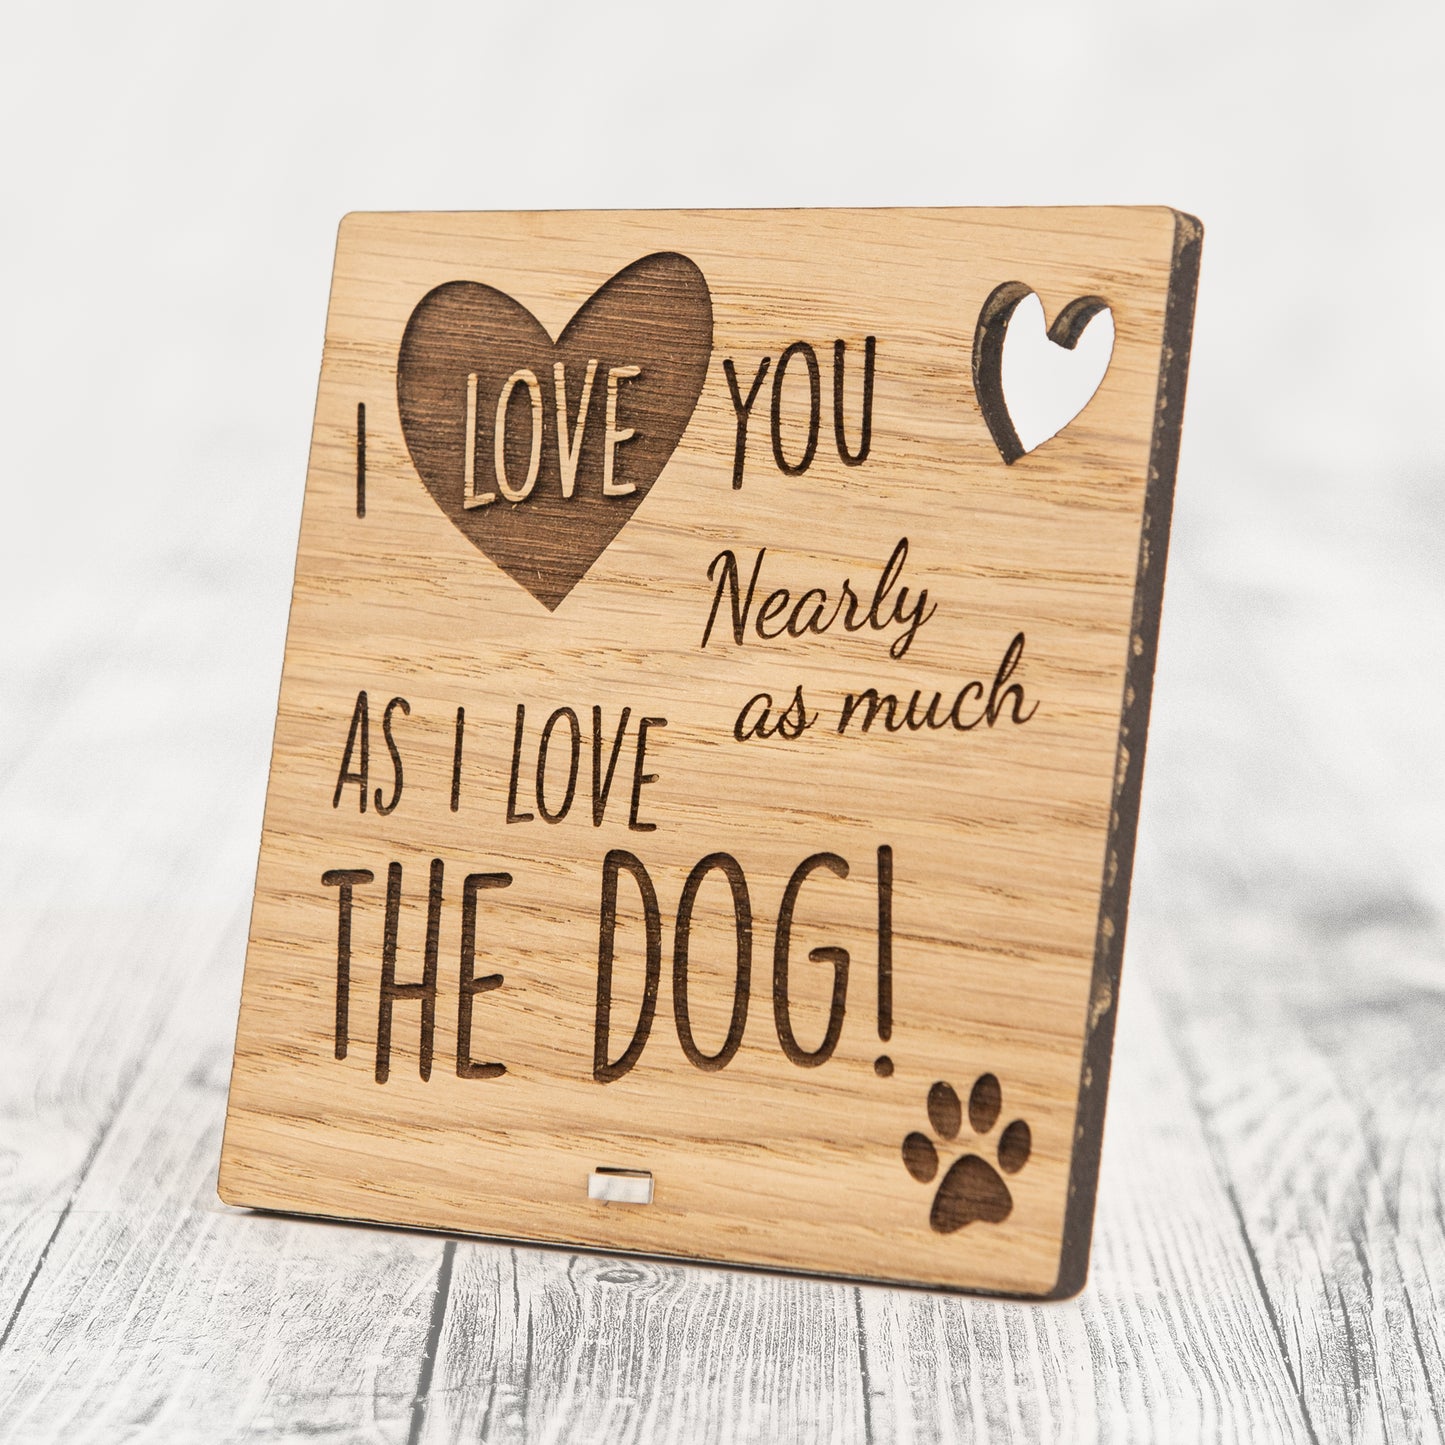 I LOVE YOU NEARLY AS MUCH AS I LOVE THE DOG - Funny Valentines Day Plaque